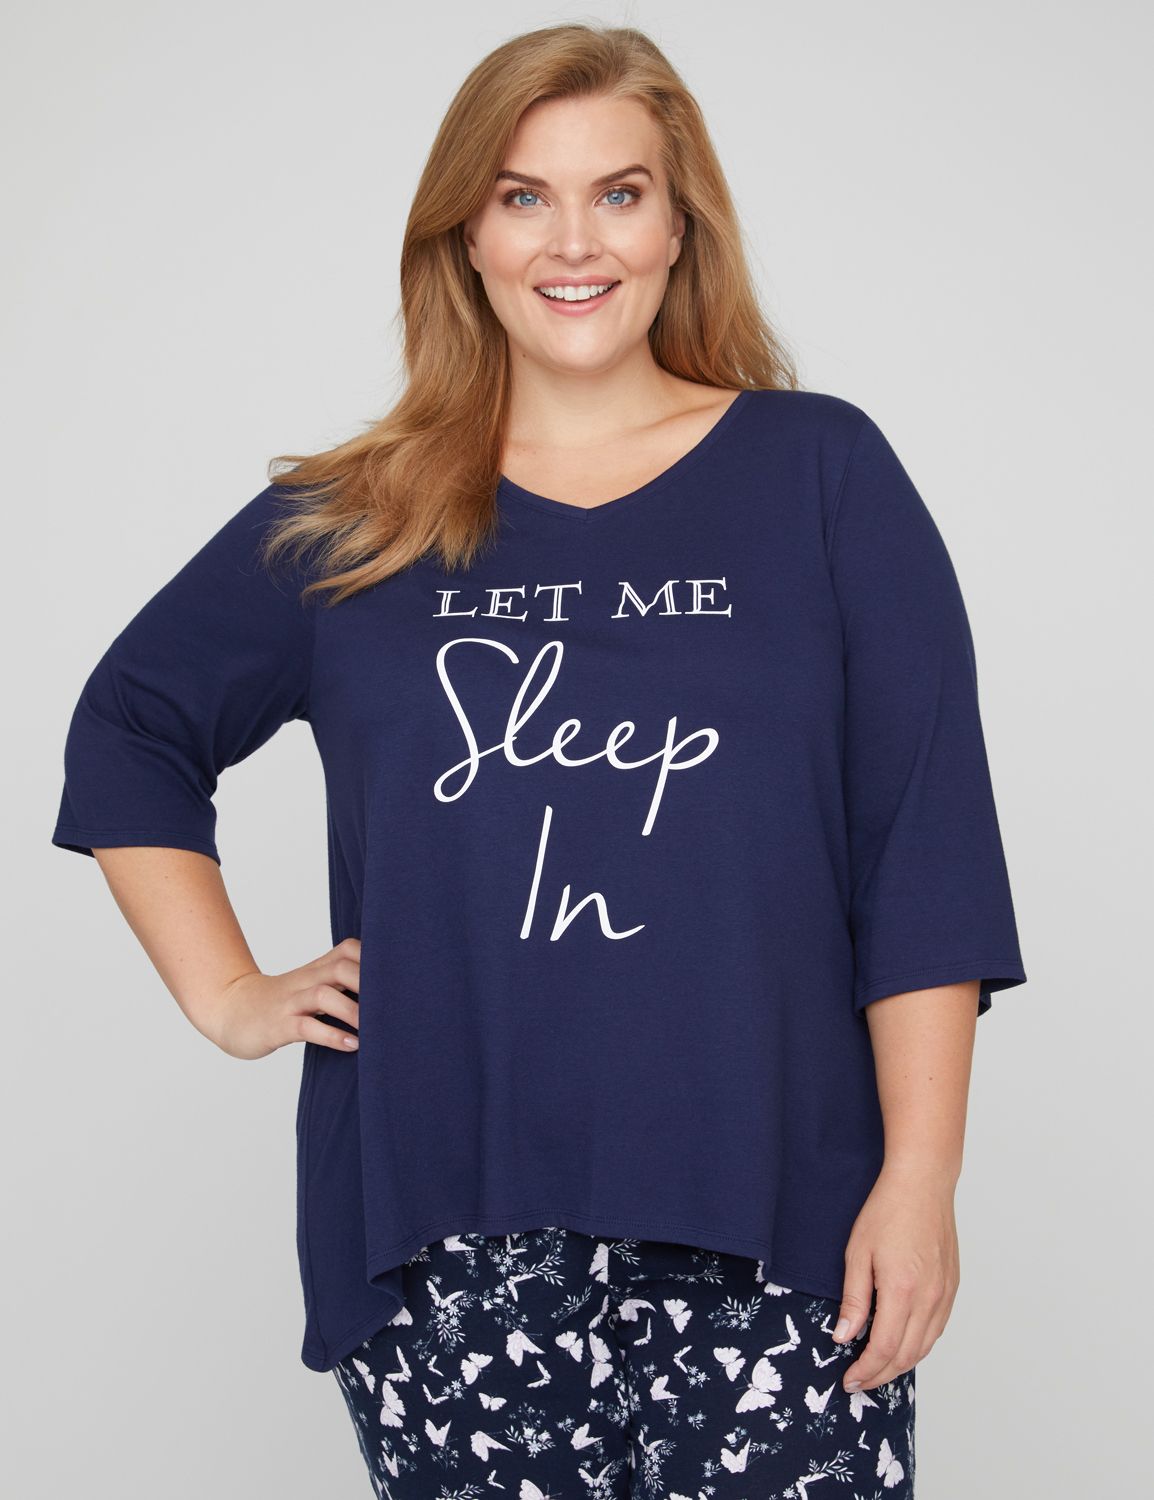 Start dreaming in this lightweight sleep tee featuring a unique graphic and a handkerchief hemline. Three-quarter sleeves. Jersey knit. Item Number #315496, 60% Cotton/40% Polyester, Machine Wash, Imported Plus Size Sleepwear, Length: 28.5" , Plus Sizes 0X-5X, Catherines Plus Sizes